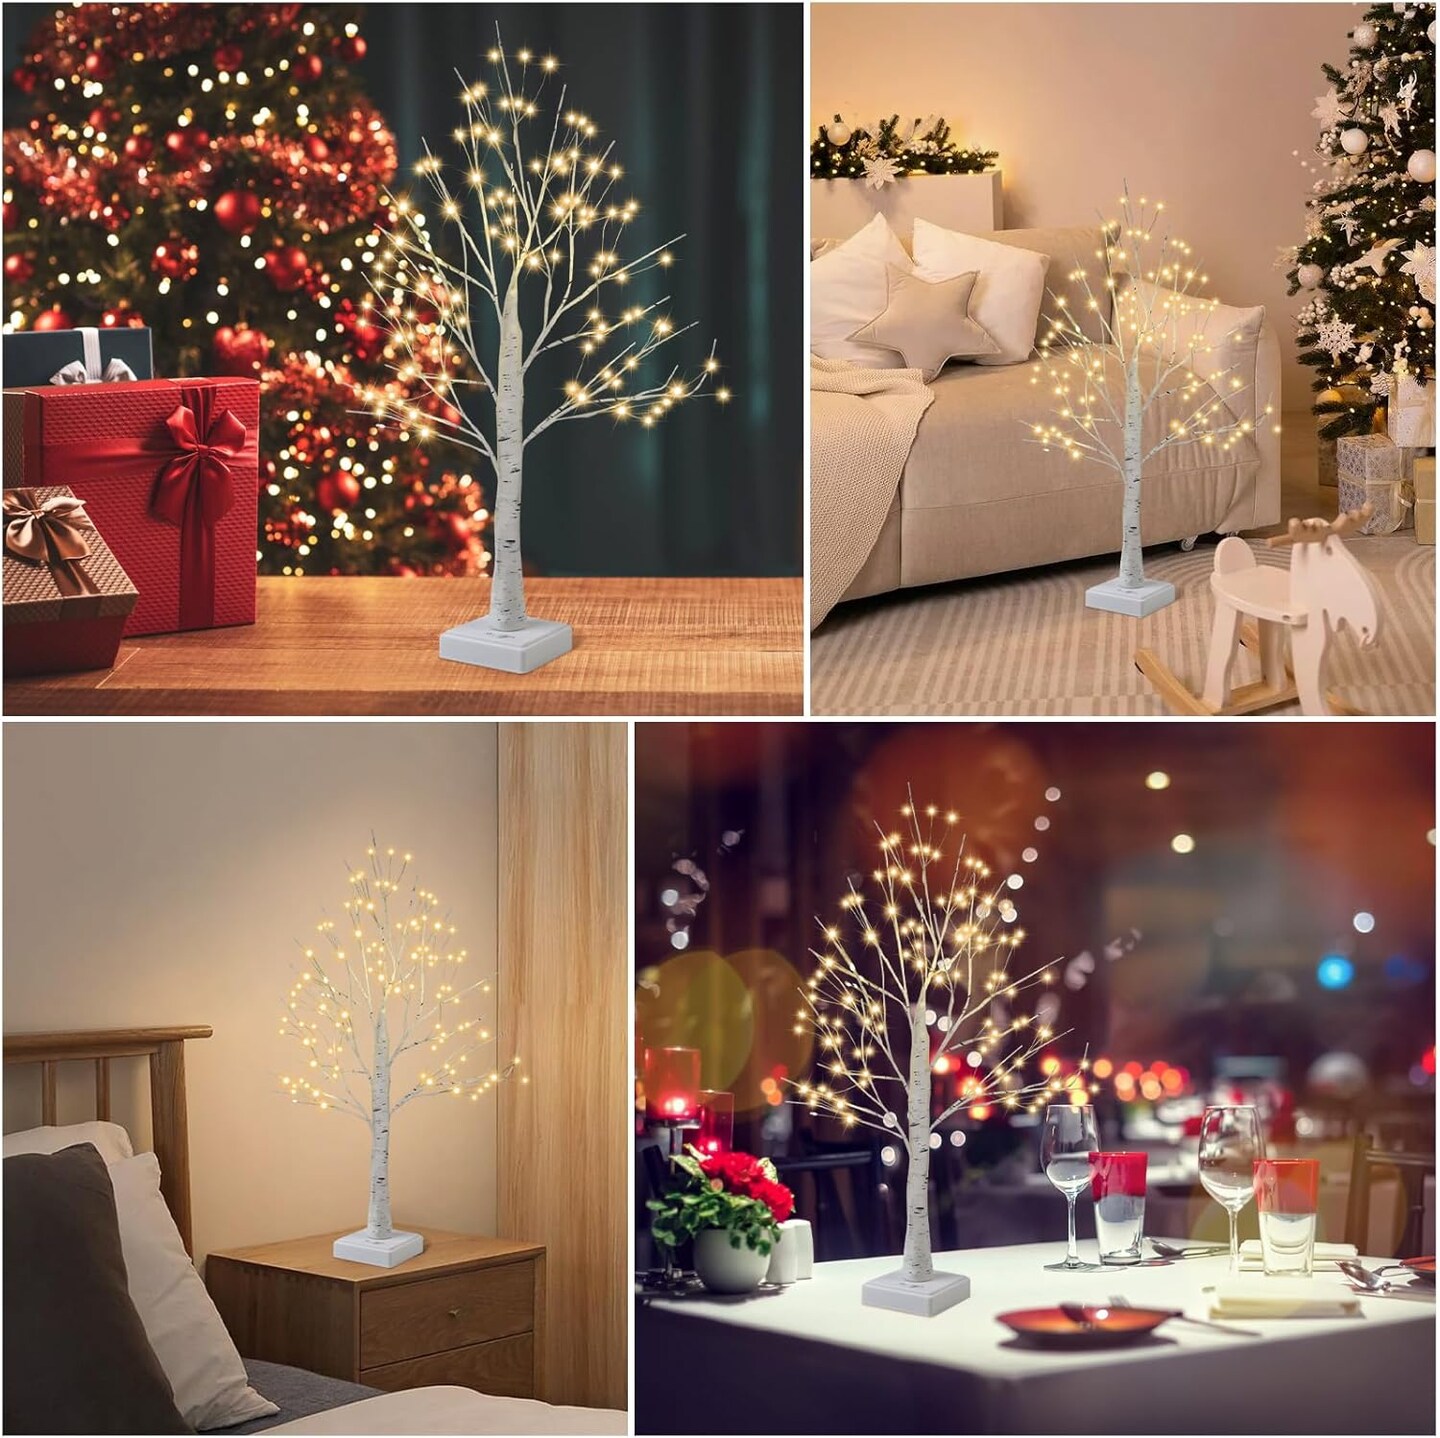 144 LED Artificial Tree Lamp with Timer, DIY Birch Tree with LED Lights, Lighted Up Tree Lamp USB/Battery Powered, Fairy Light Spirit Tree for Table Home Wedding Bedroom Christmas (Warm White).